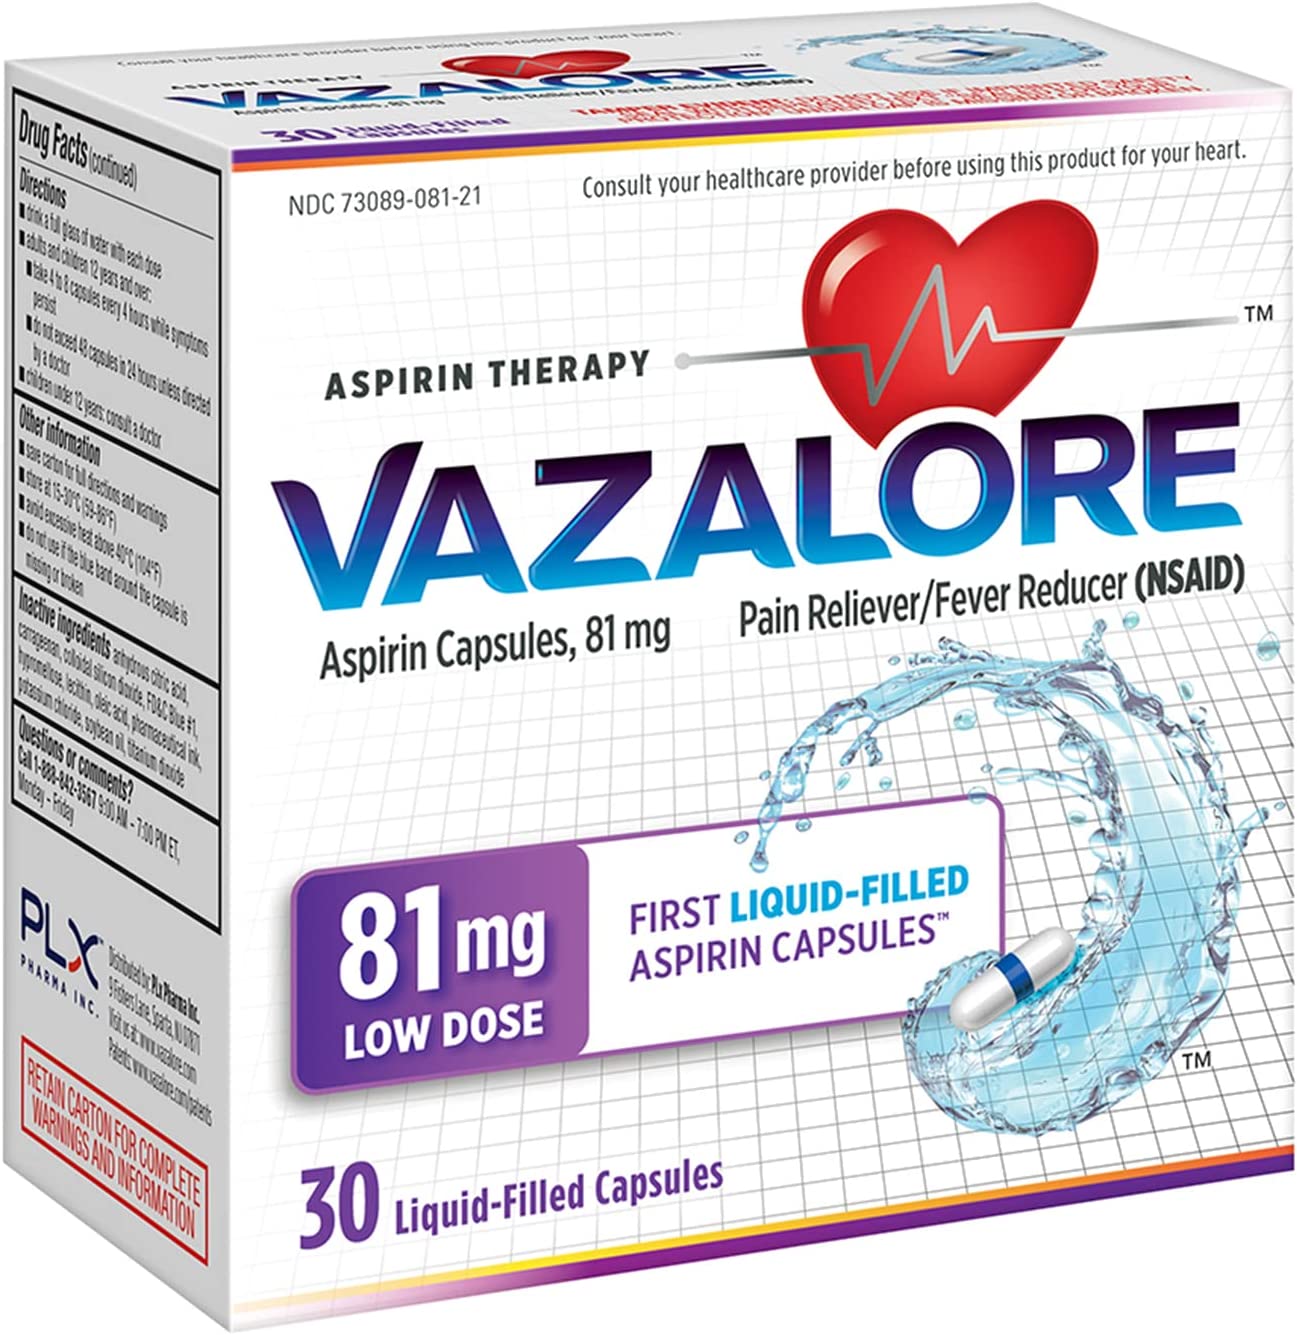 VAZALORE? Aspirin 81mg for Adults | Low Dose Aspirin Heart Therapy | Liquid-Filled Capsules to Help Protect Stomach | Pain Relief | 30 Count